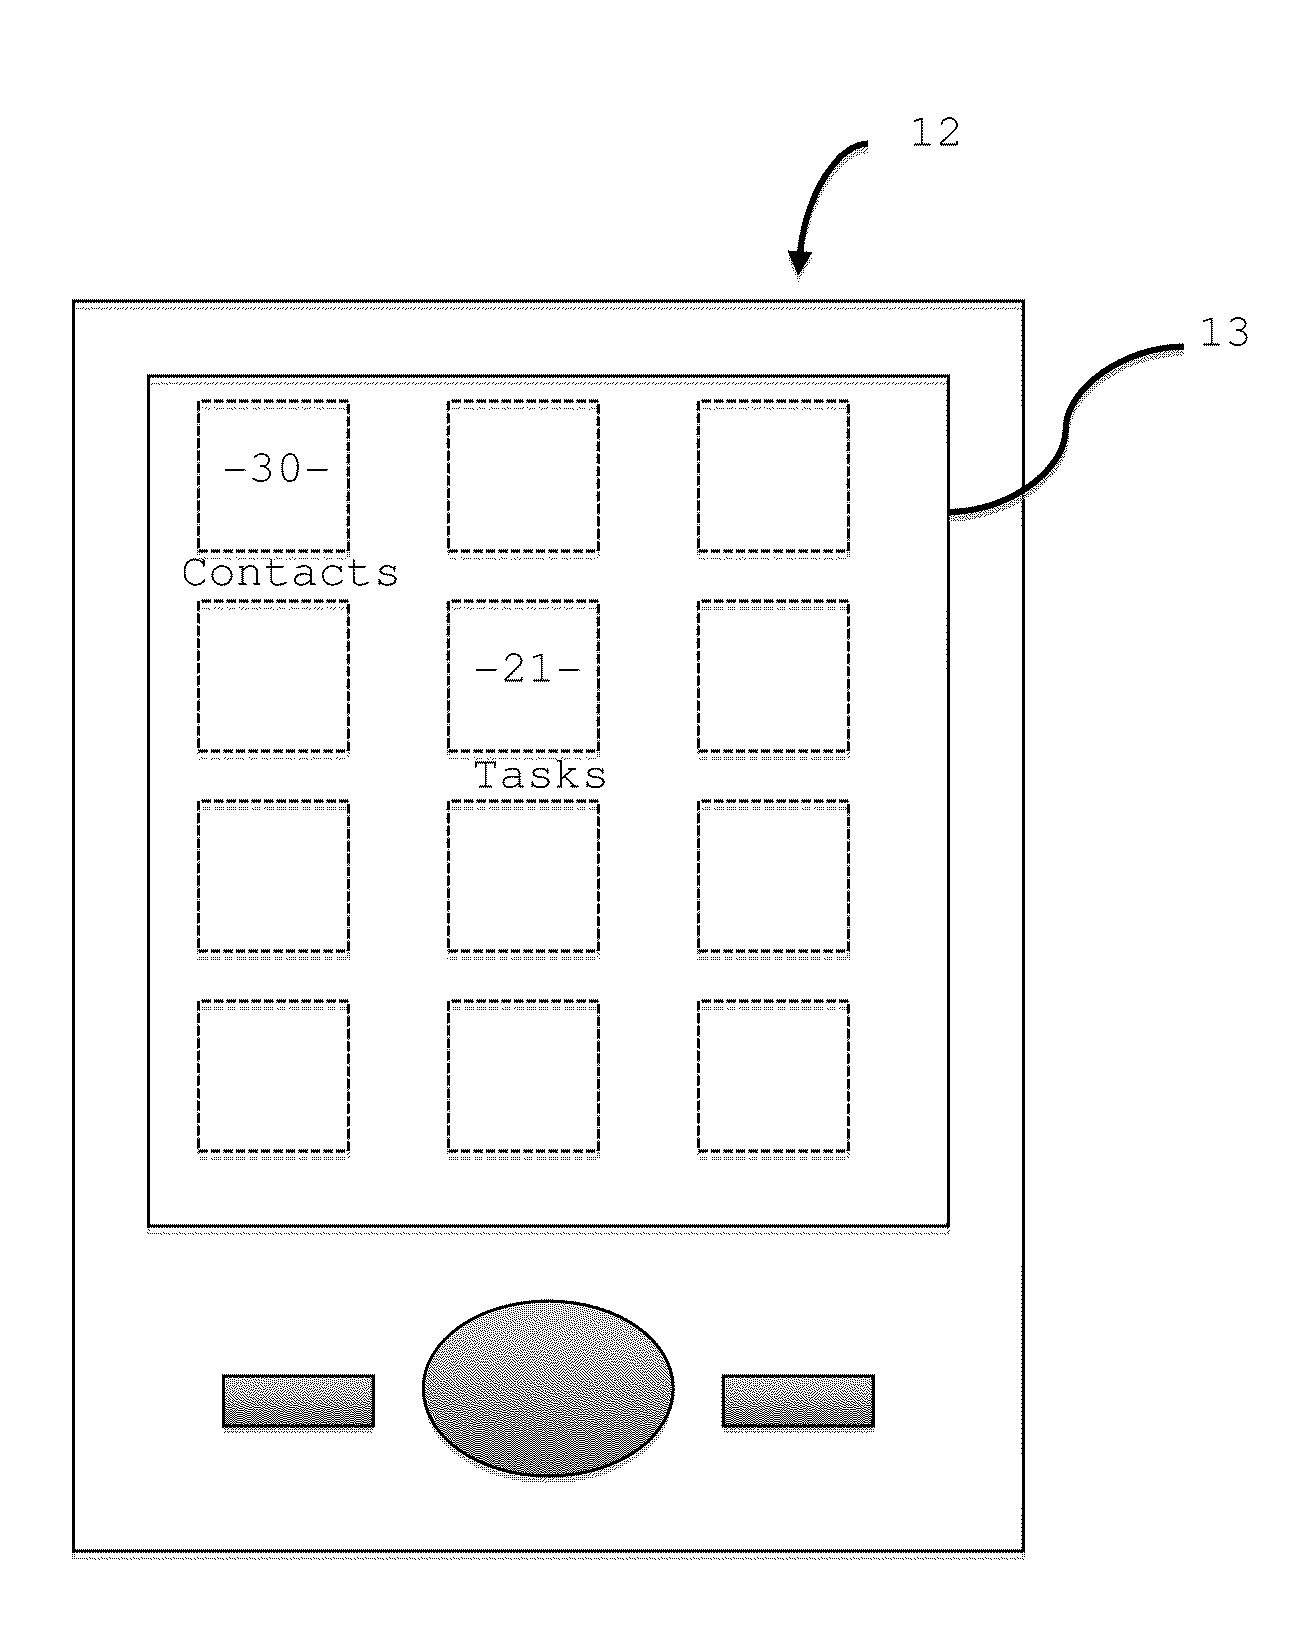 Interactive task management system and method